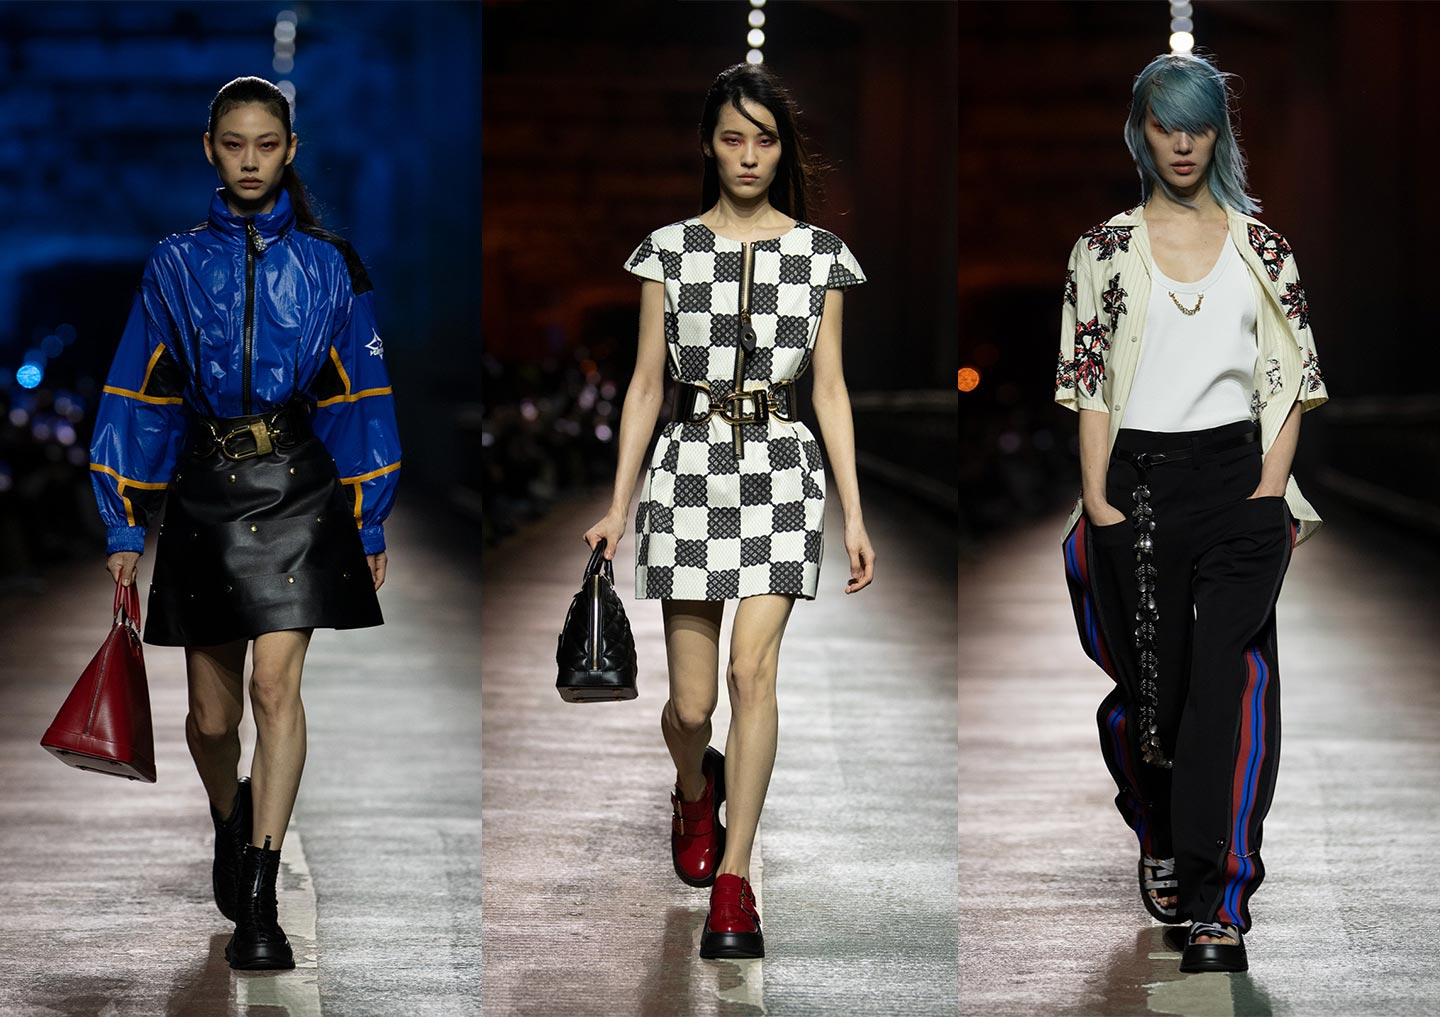 Nicolas Ghesquière presented his women’s Pre-Fall 2023 collection for Louis Vuitton on the Jamsugyo Bridge in Seoul, on Saturday, April 29th © Louis Vuitton